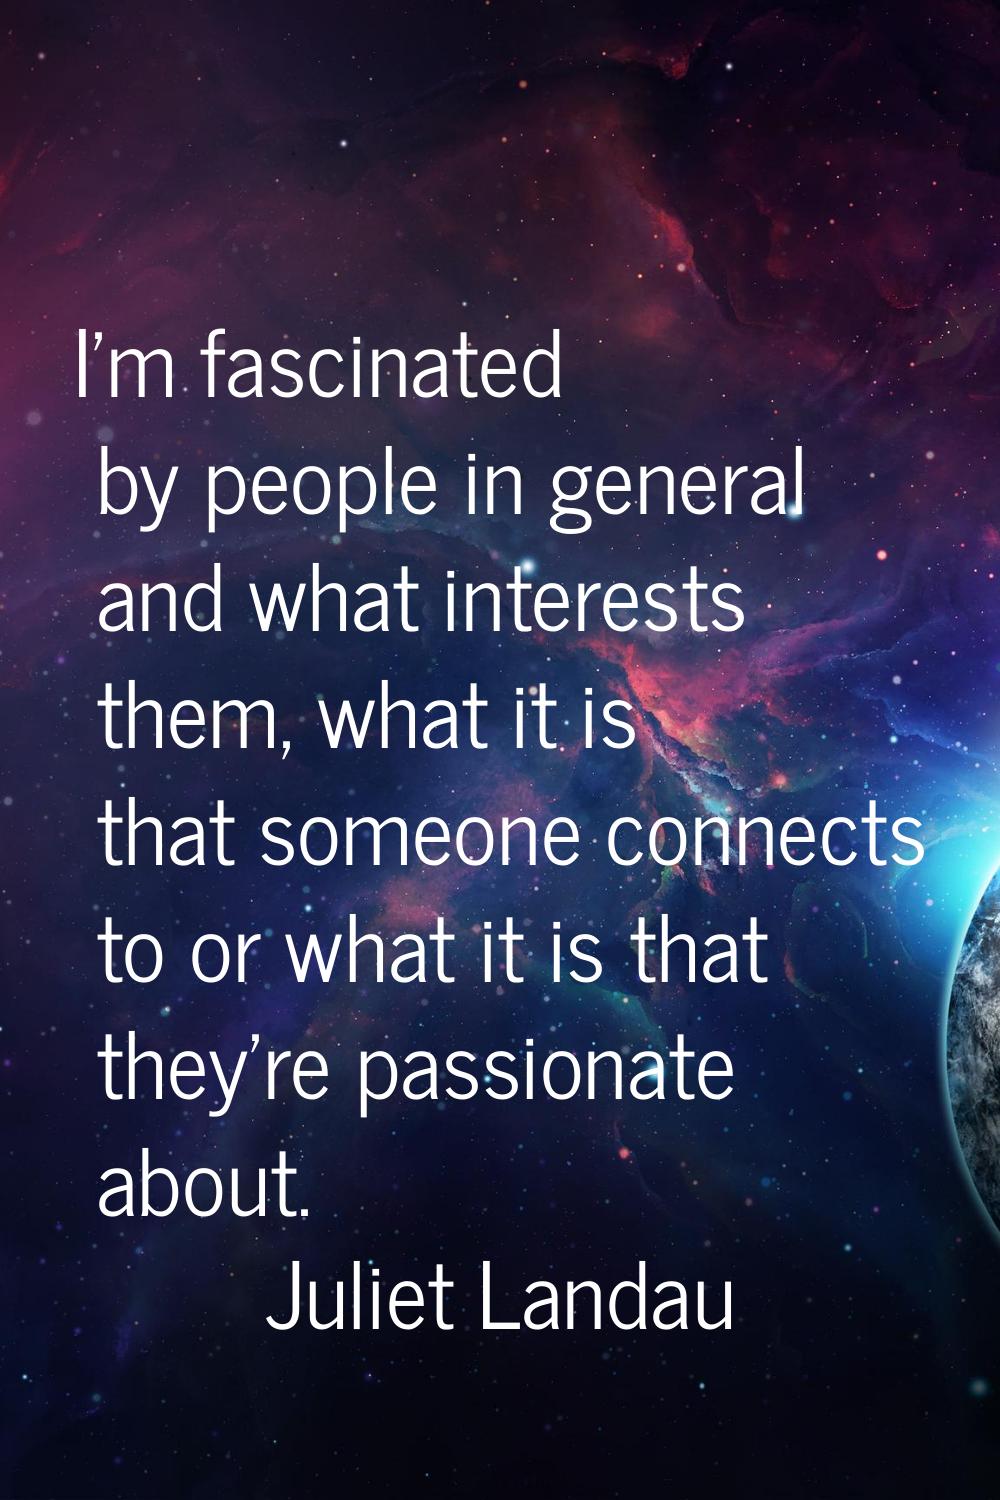 I'm fascinated by people in general and what interests them, what it is that someone connects to or